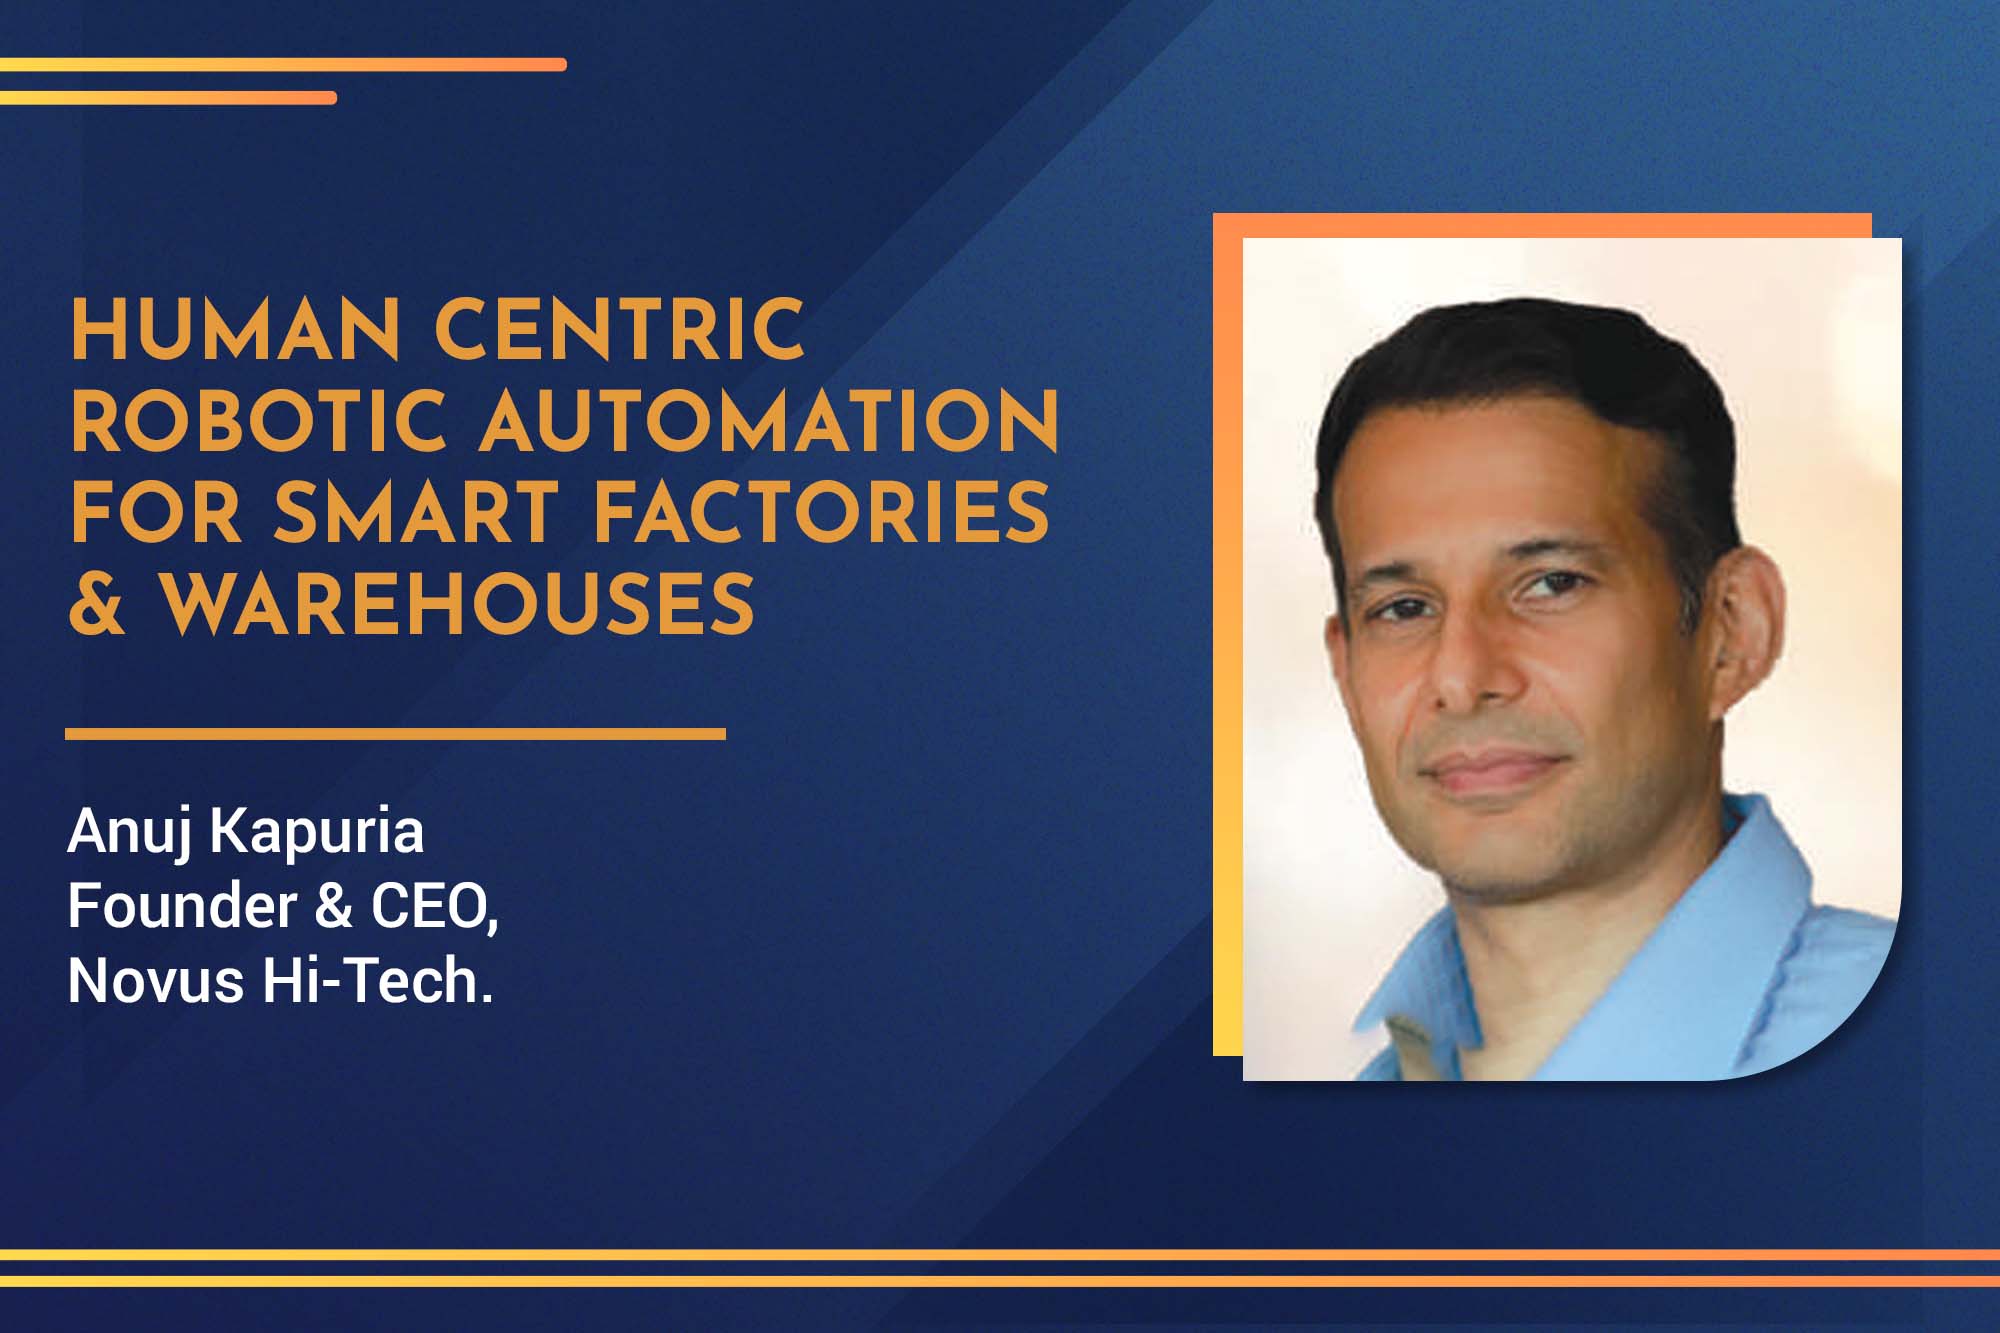 Human-centric robotic automation for smart factories & warehouses